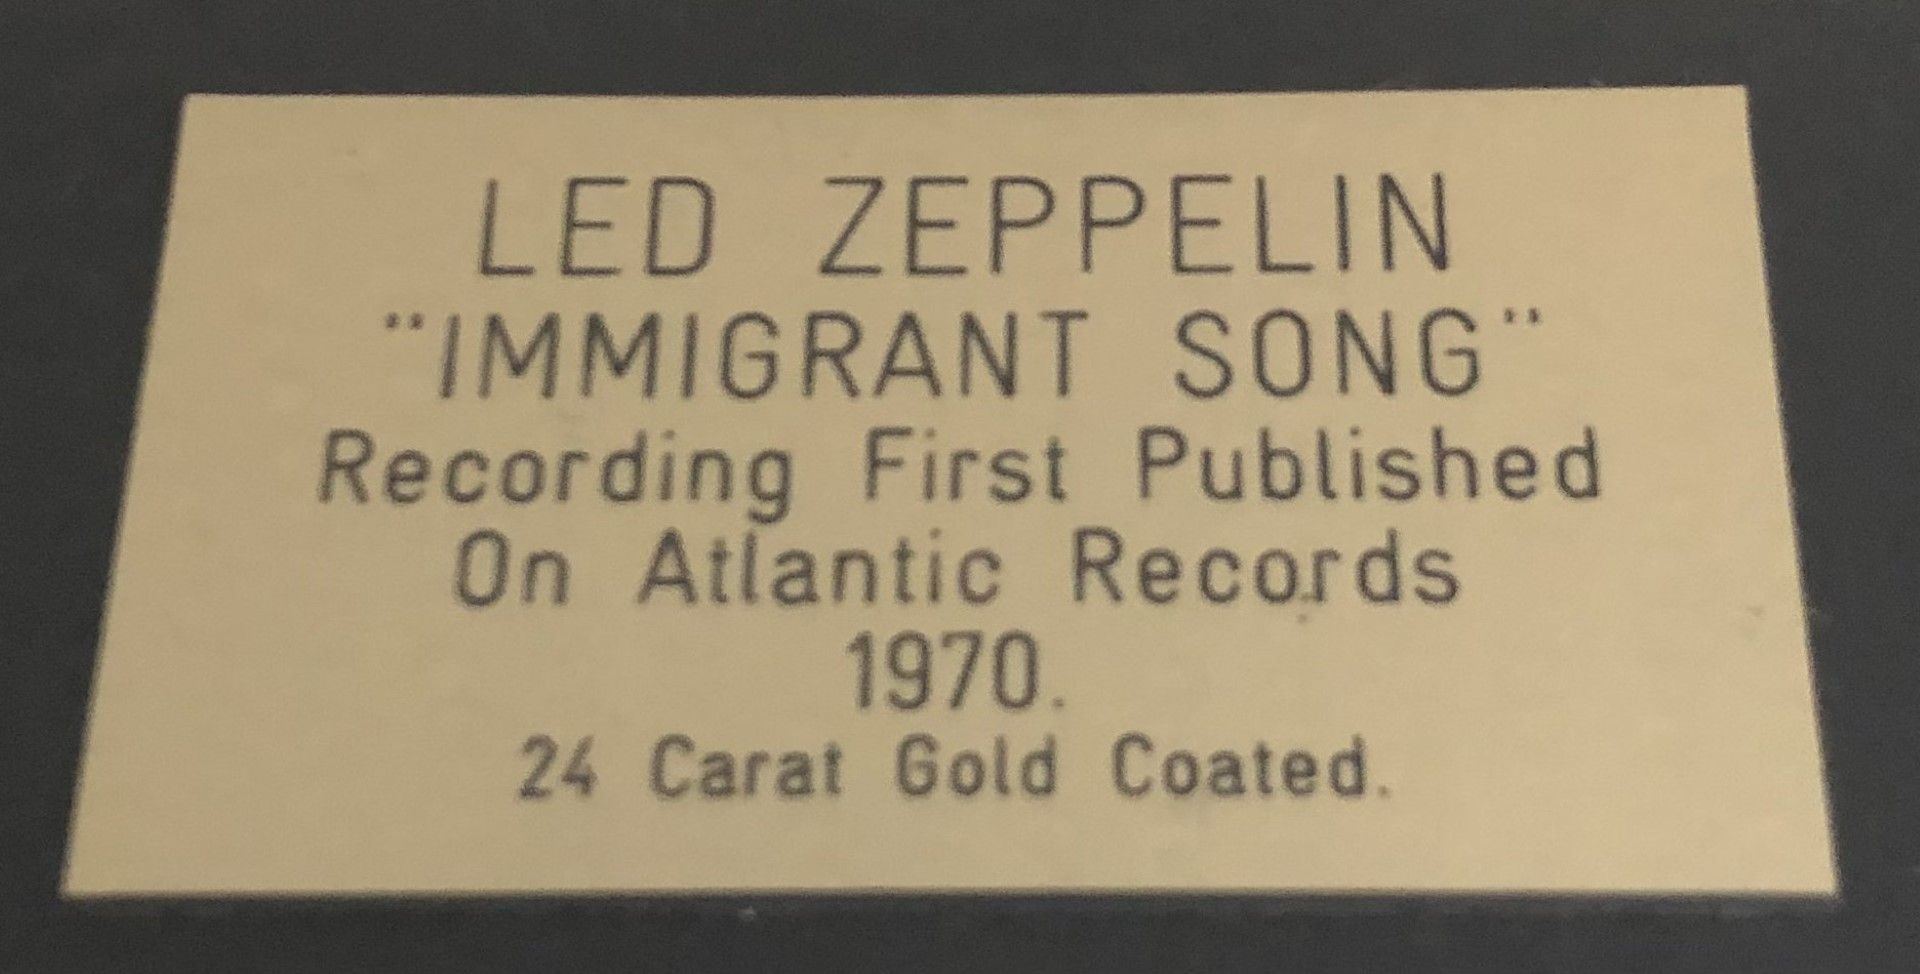 1 x 24 Carat Gold Coated 7 Inch Vinyl Record - LED ZEPPELIN IMMIGRANT SONG - Mounted and Presented - Image 2 of 5